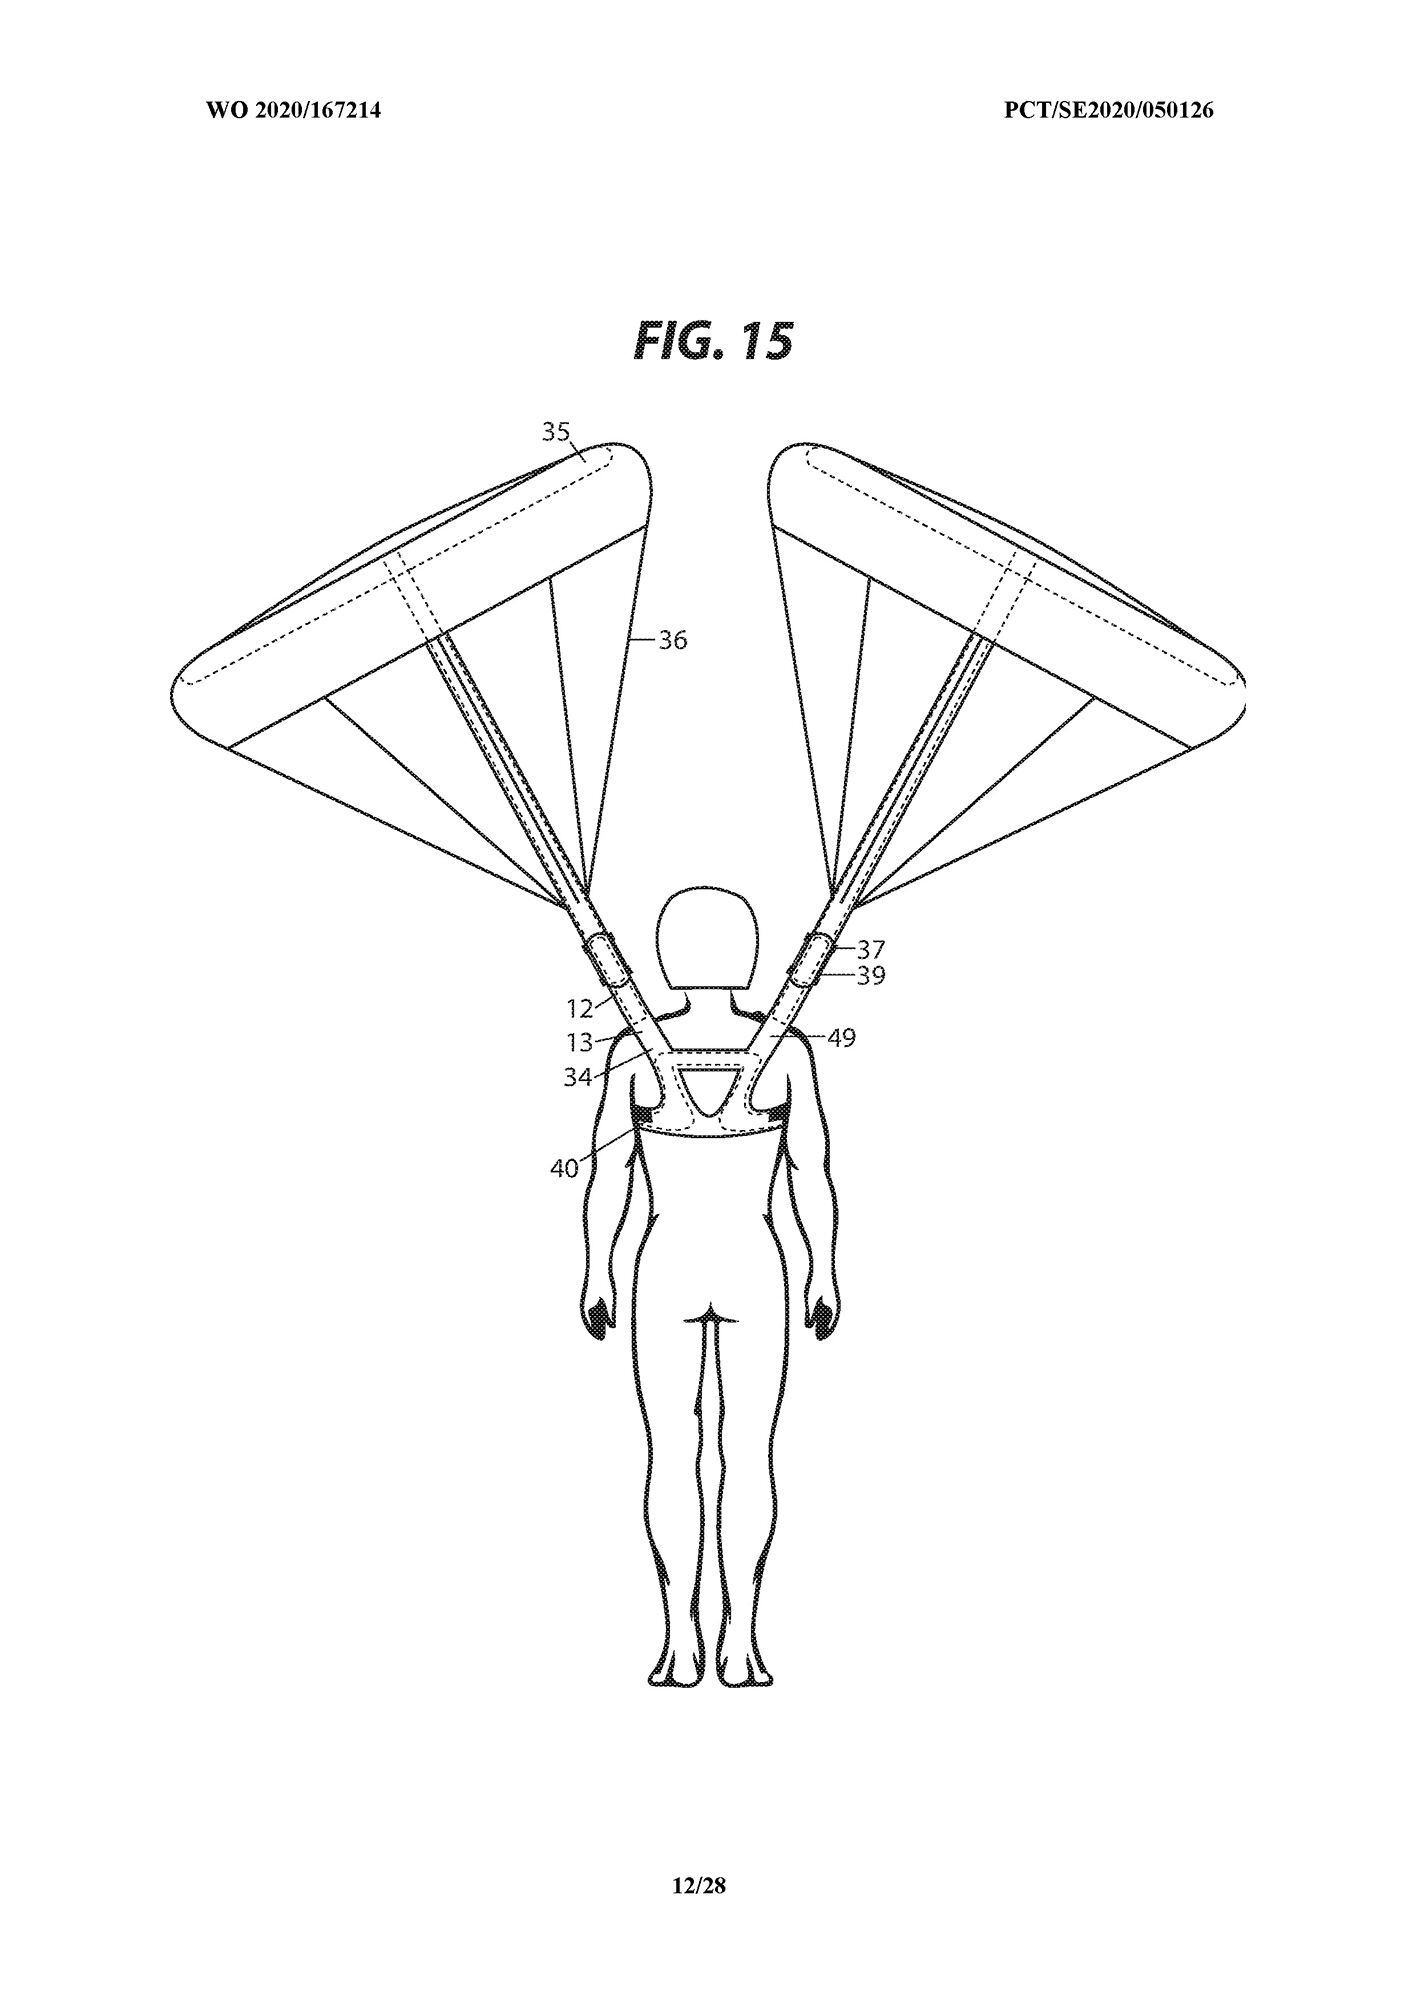 Here is the patent illustration for the inflated parachute floating above the rider’s head.